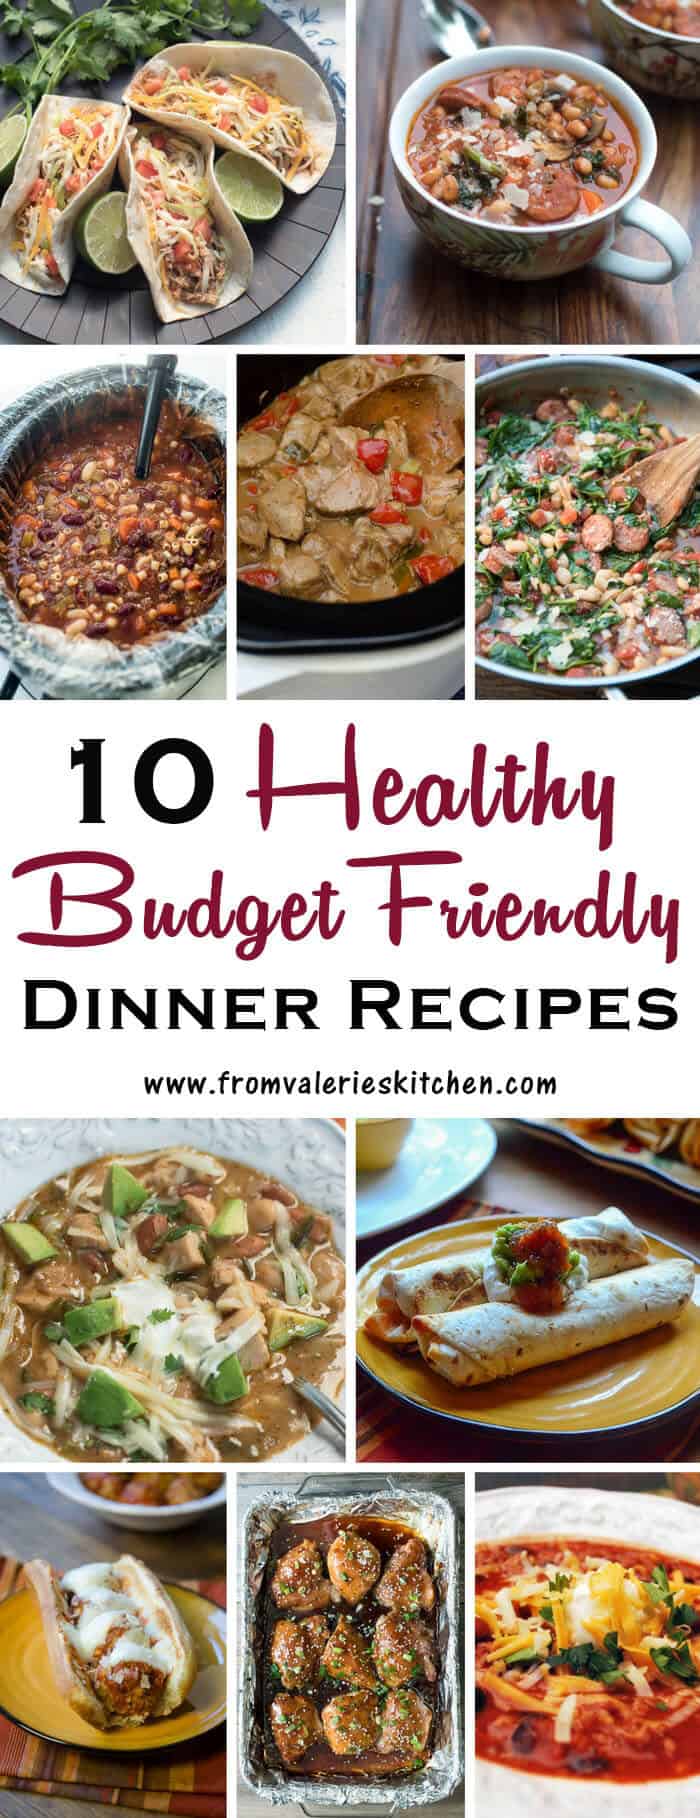 Familiar, comforting meals that are all wholesome options and inexpensive to prepare. These 10 Healthy Dinner Recipes will help you get back on track!